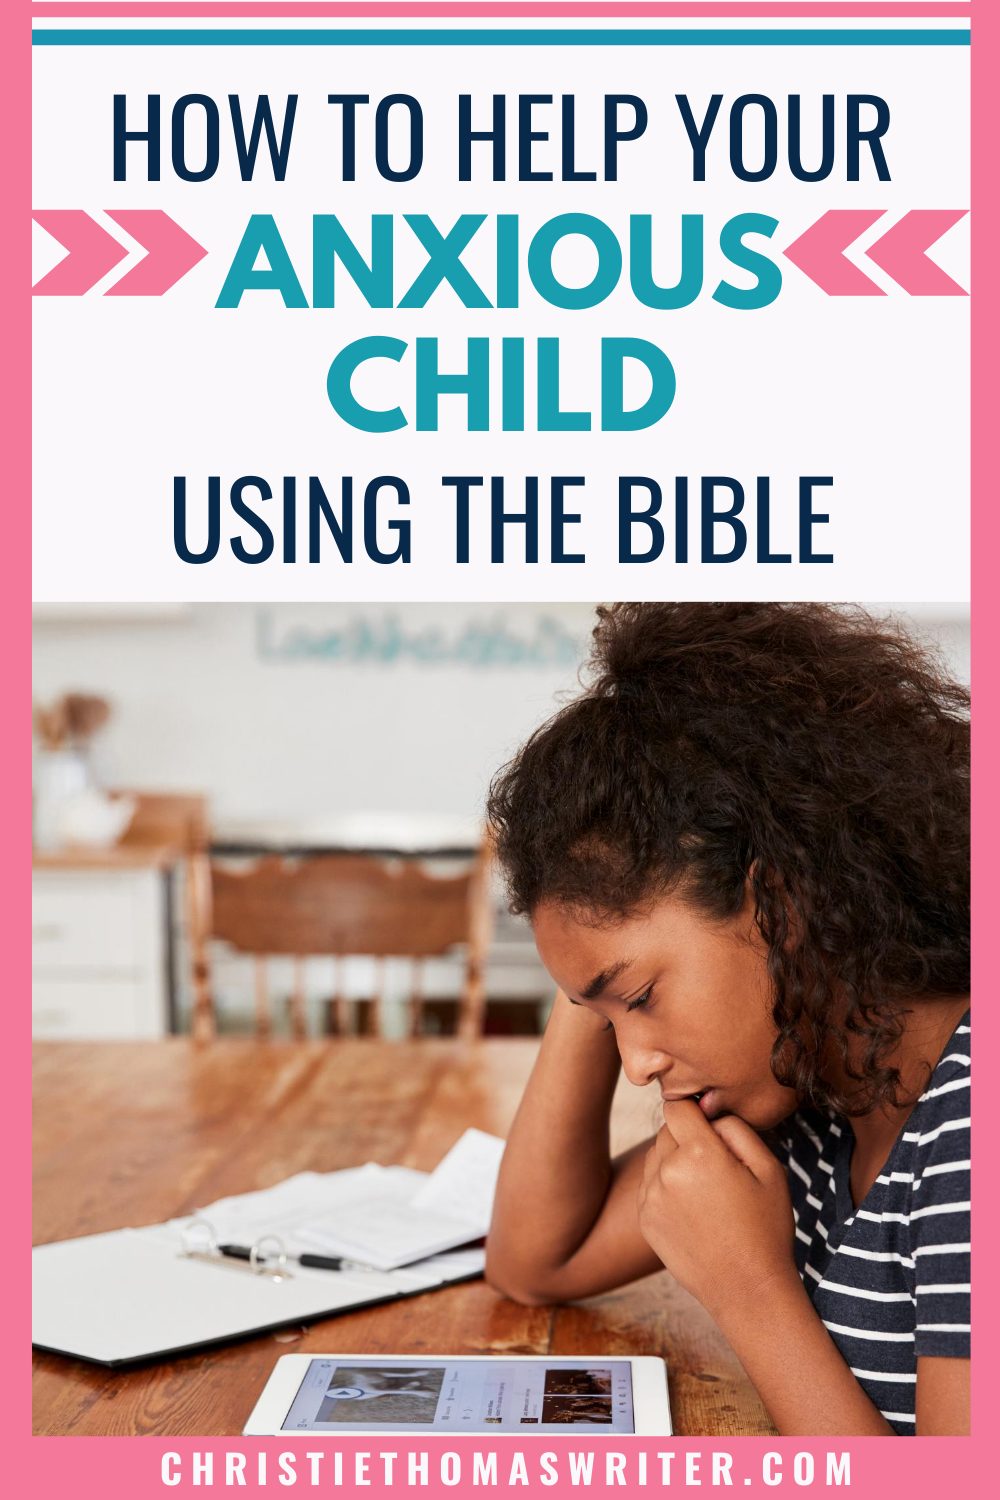 Parenting advice to helping an anxious child. When your child worries too much, here are some tips and tools to help them work through their fears instead of ignoring them or pasting a platitude on top. #childhoodanxiety #anxiety #christianparenting #Christianmom #familydiscipleship #hopegrownfaith